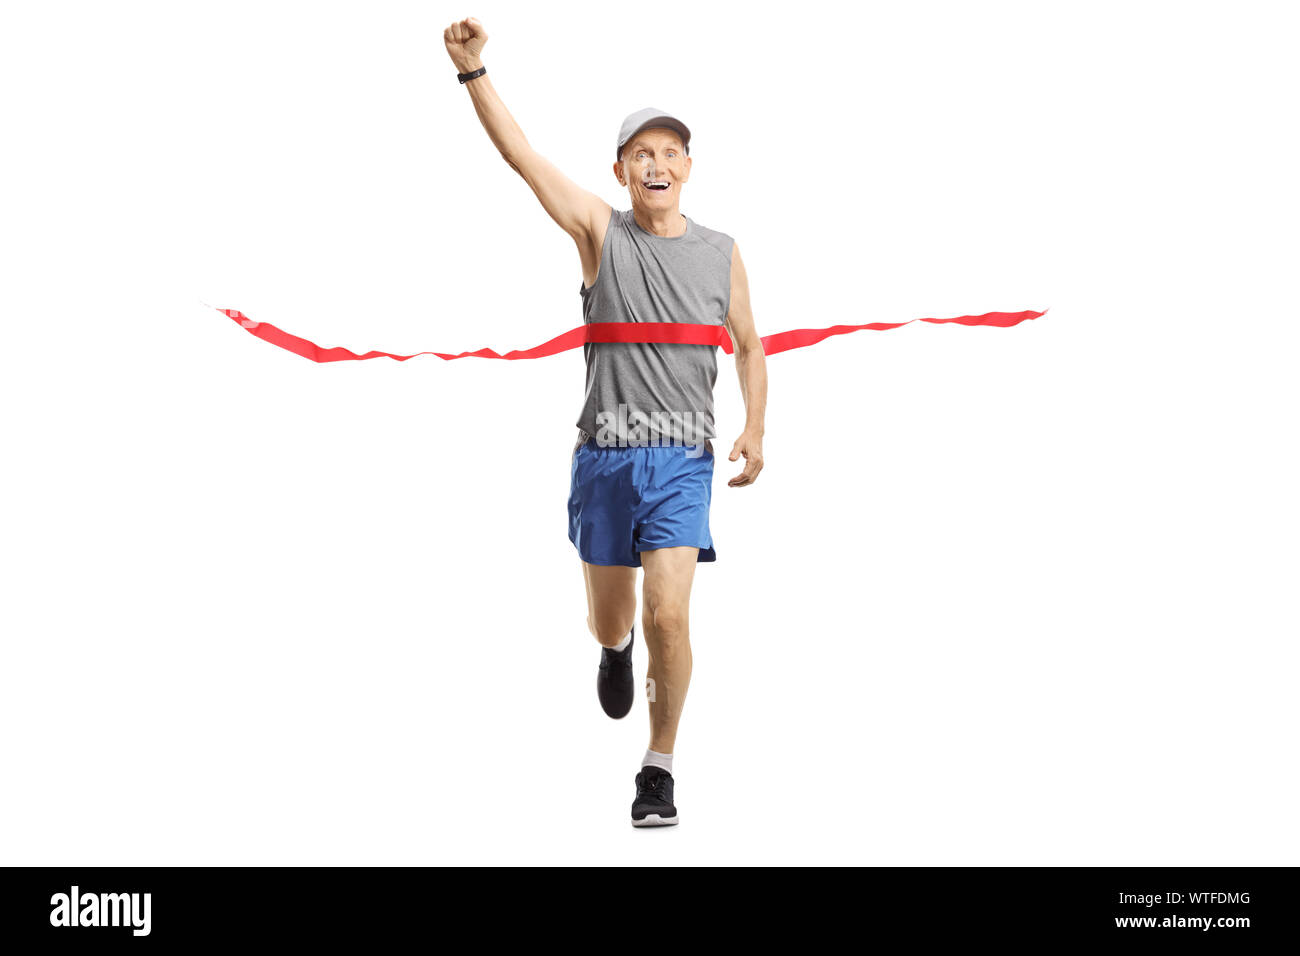 Full length portrait of a senior man on the finish of a marathon gesturing happiness isolated on white background Stock Photo